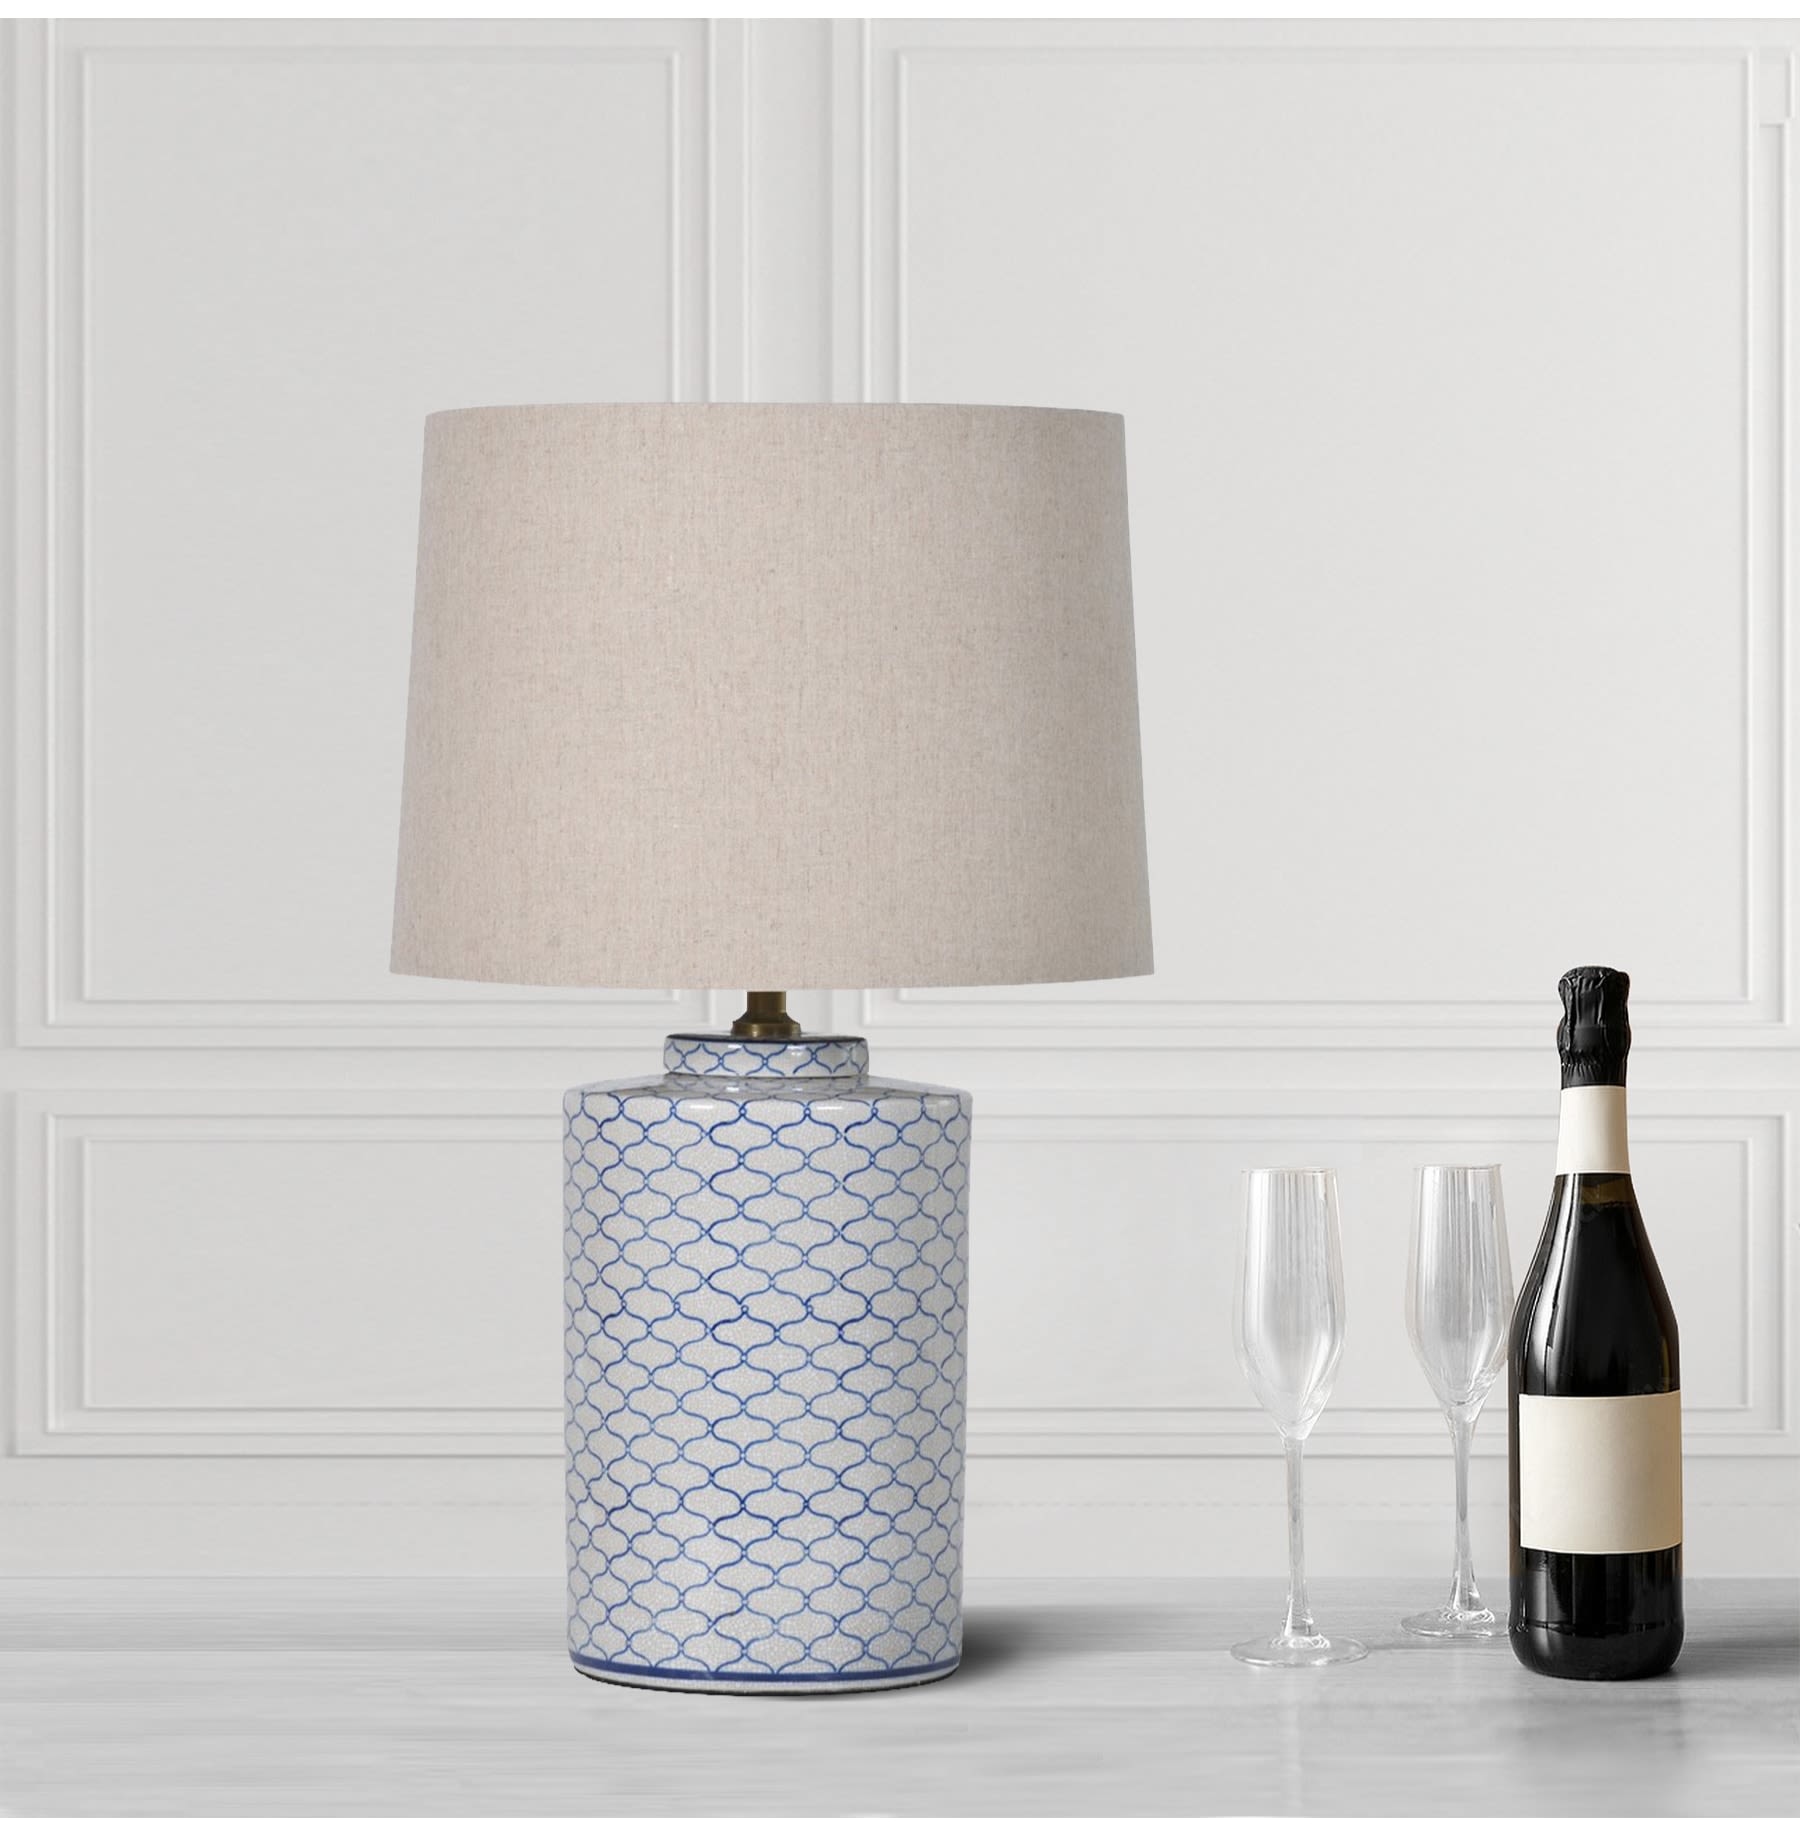 Blue and White Patterned Table Lamp